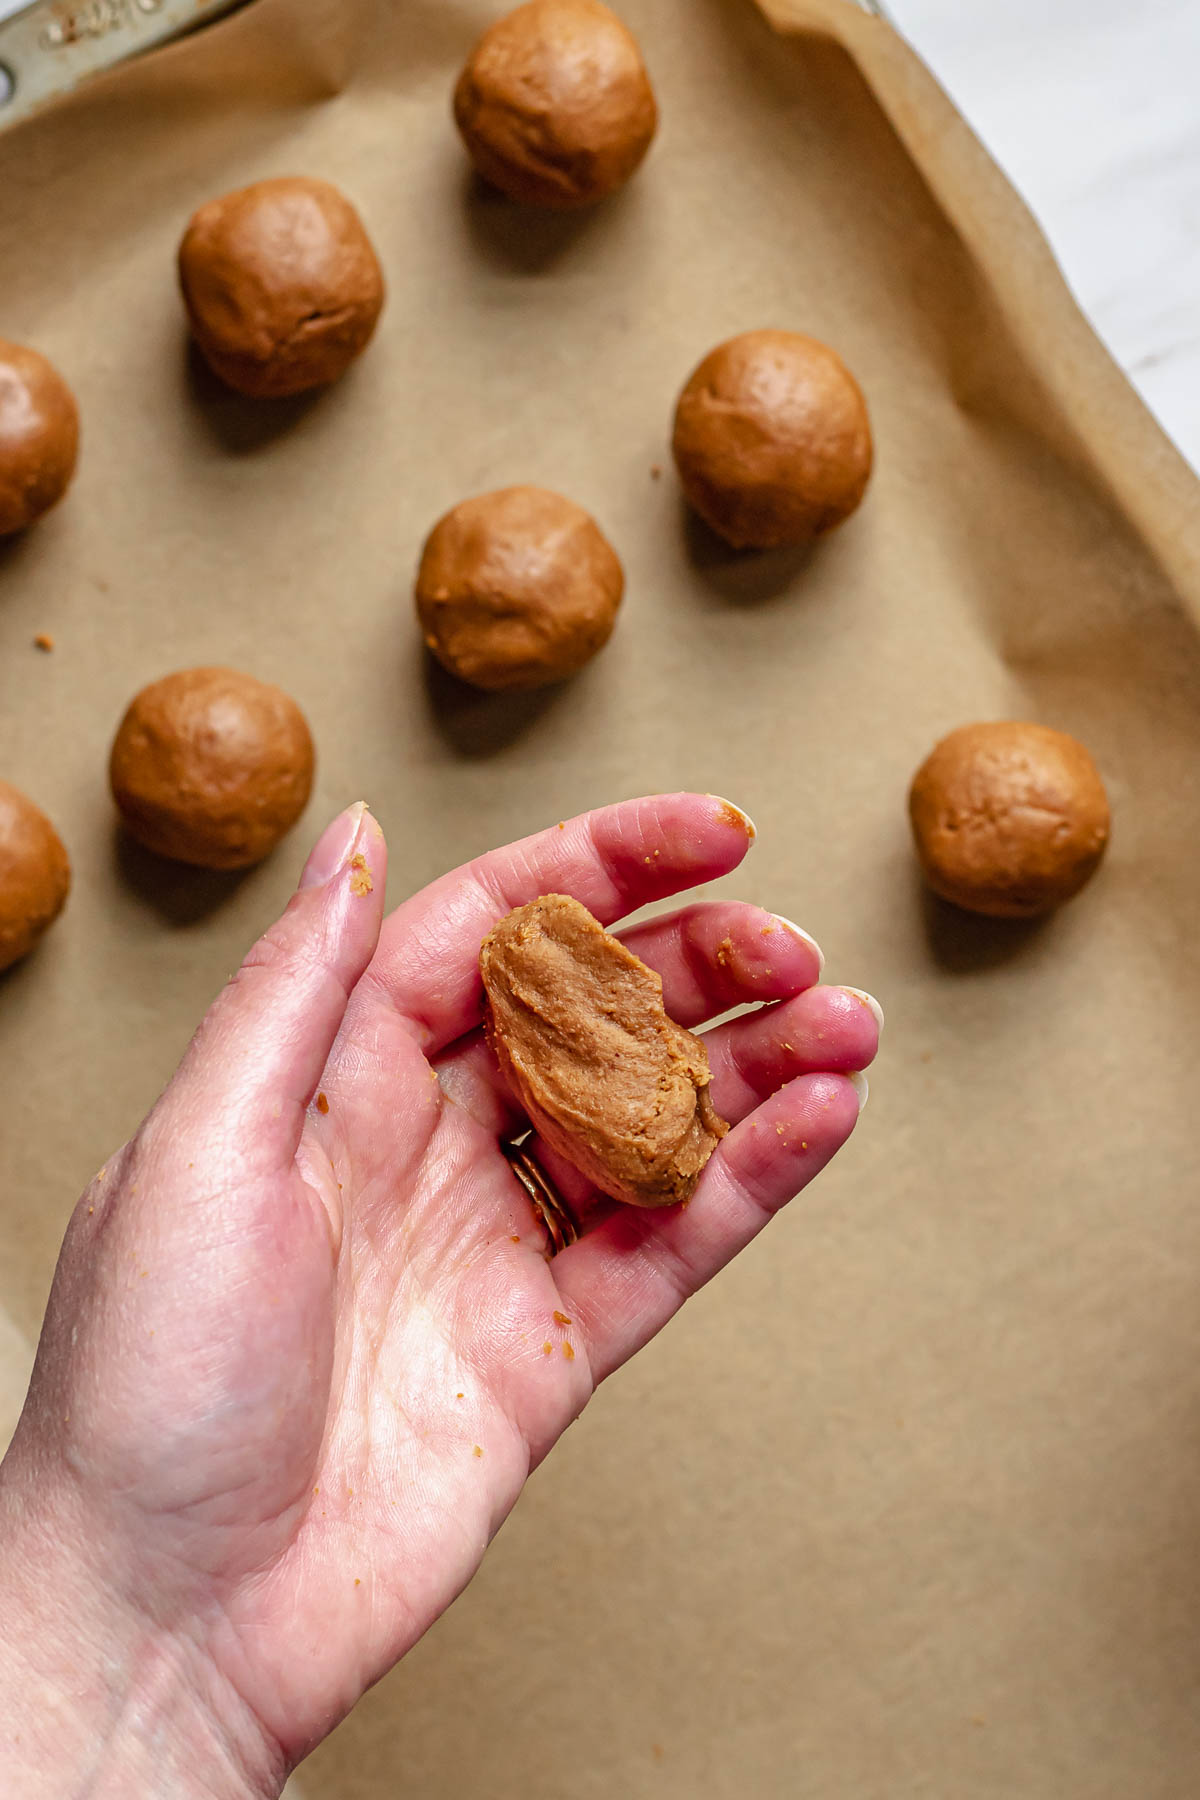 Biscoff truffle in a hand.